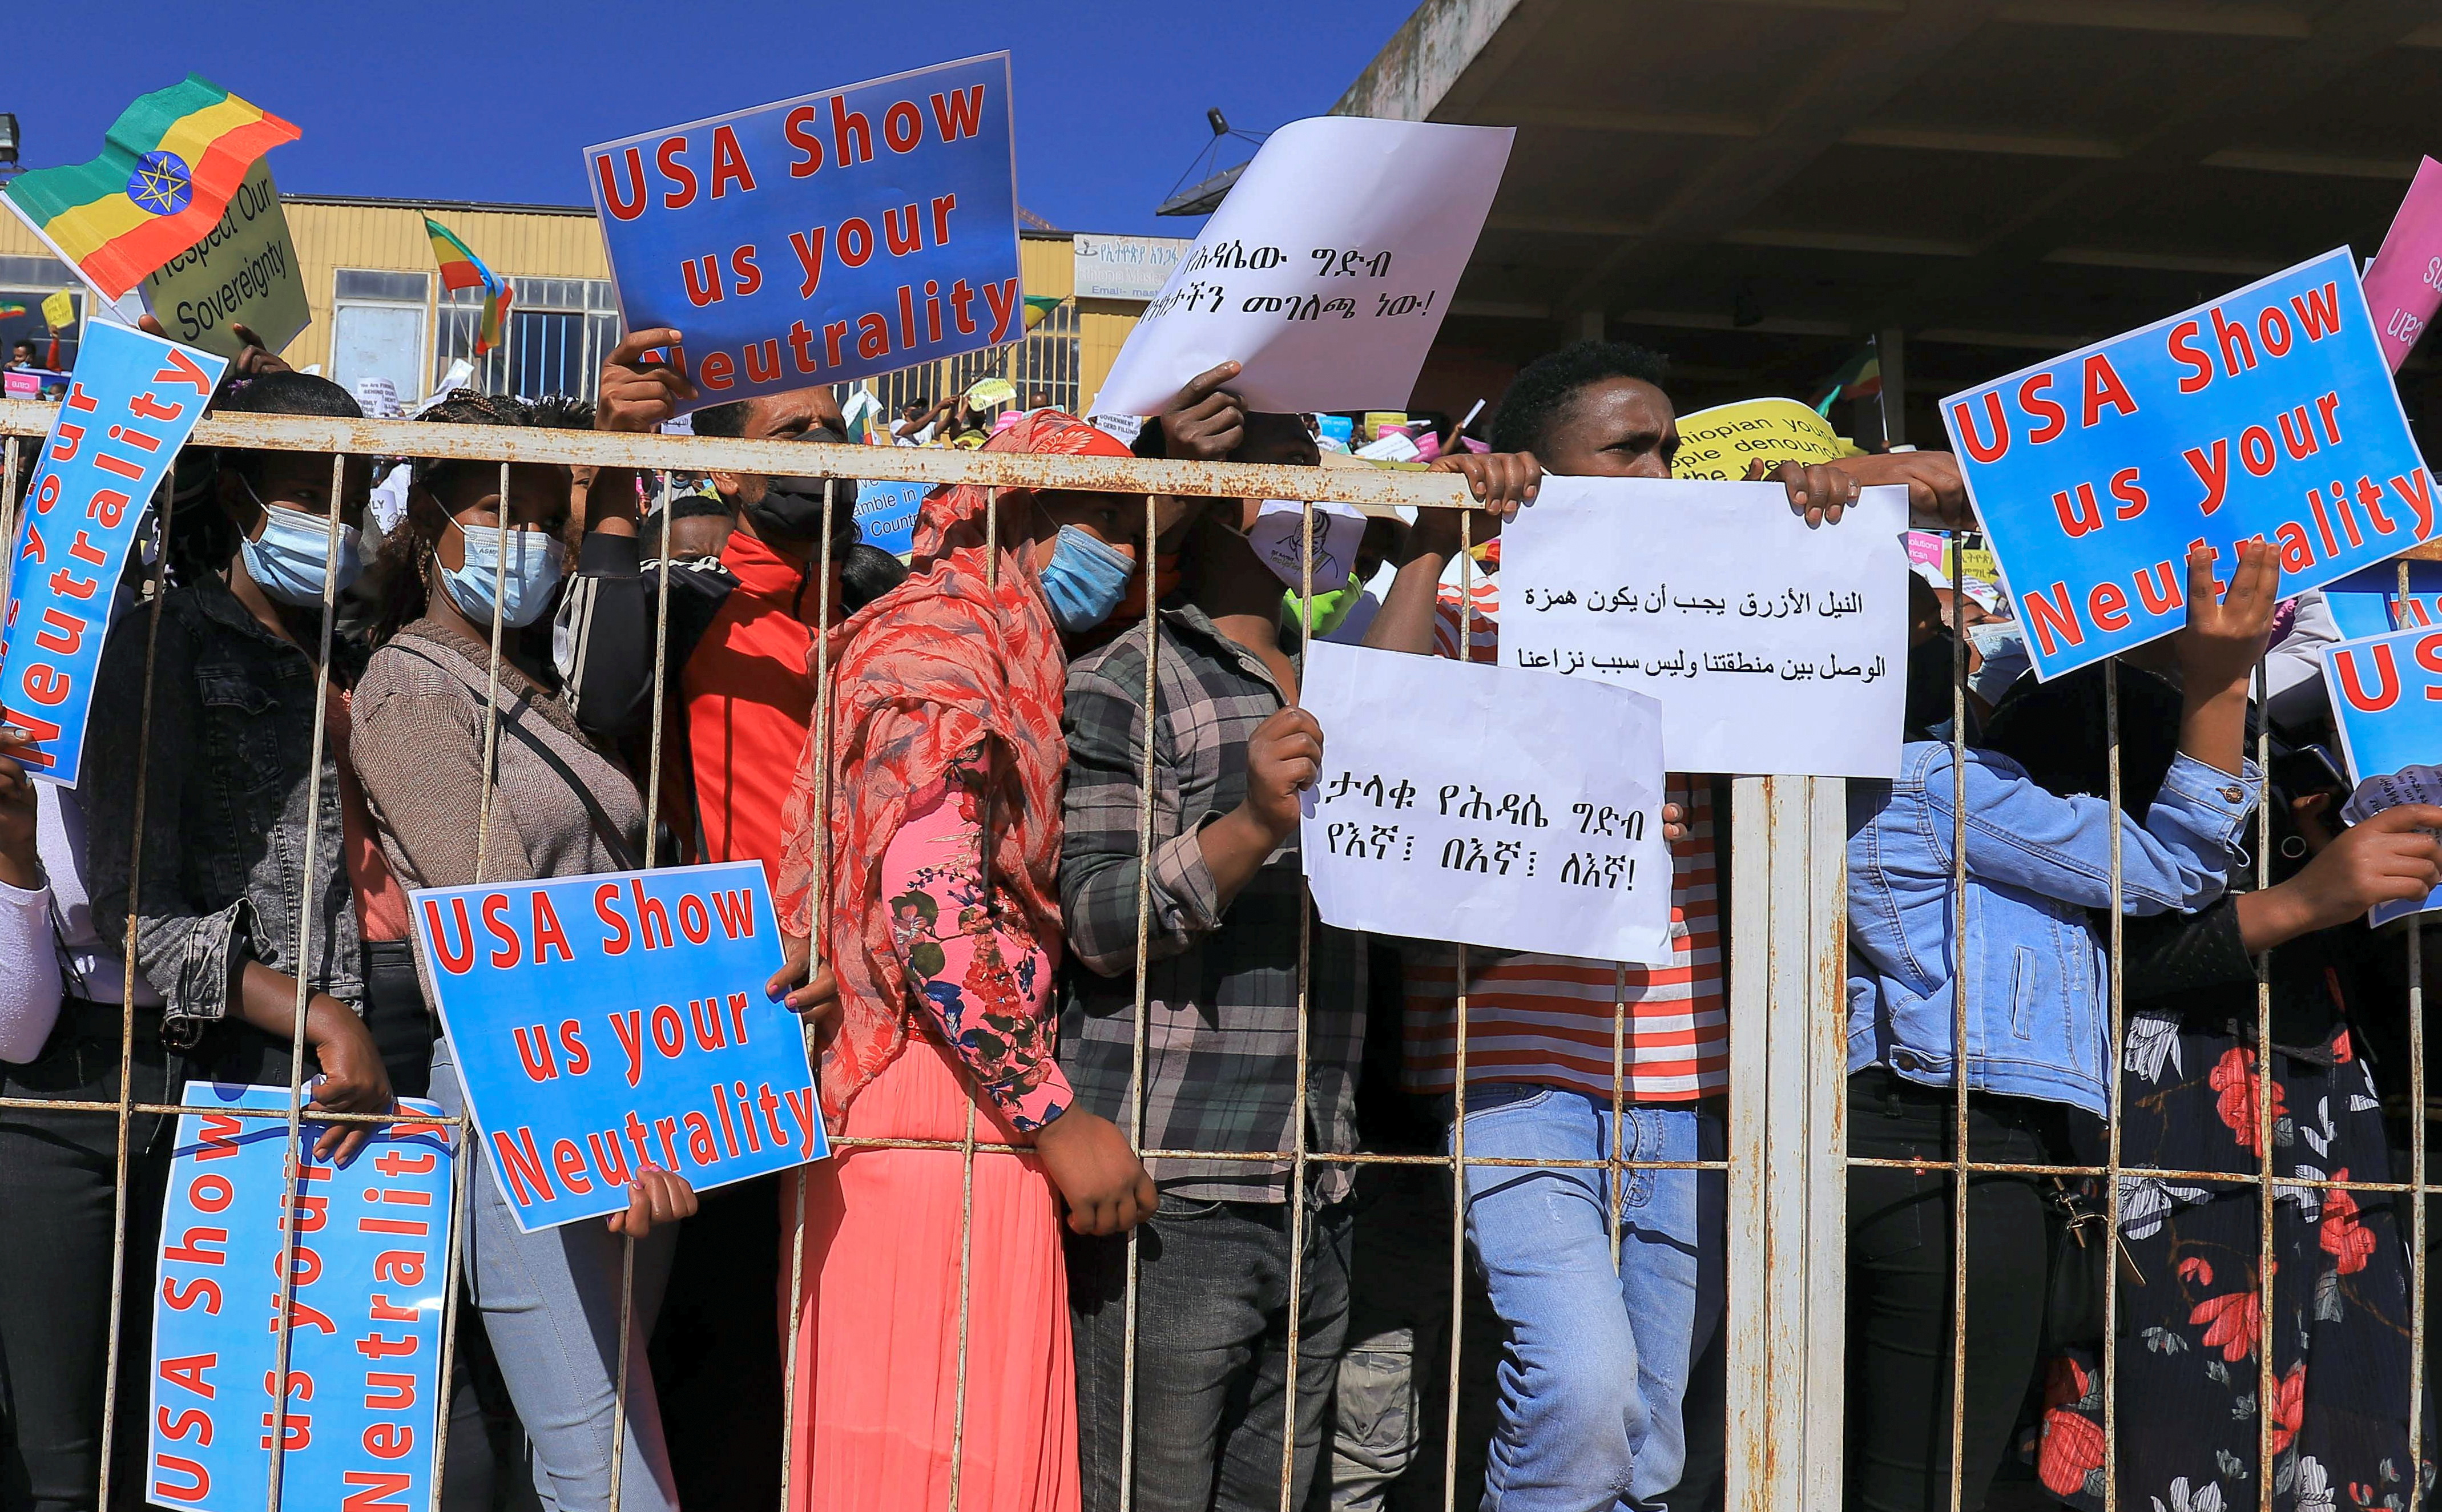 Ethiopian pro-government demonstrators carry placards as they attend a rally to protest against the U.S. action over alleged human rights abuses during the conflict in the Tigray region, in Addis Ababa